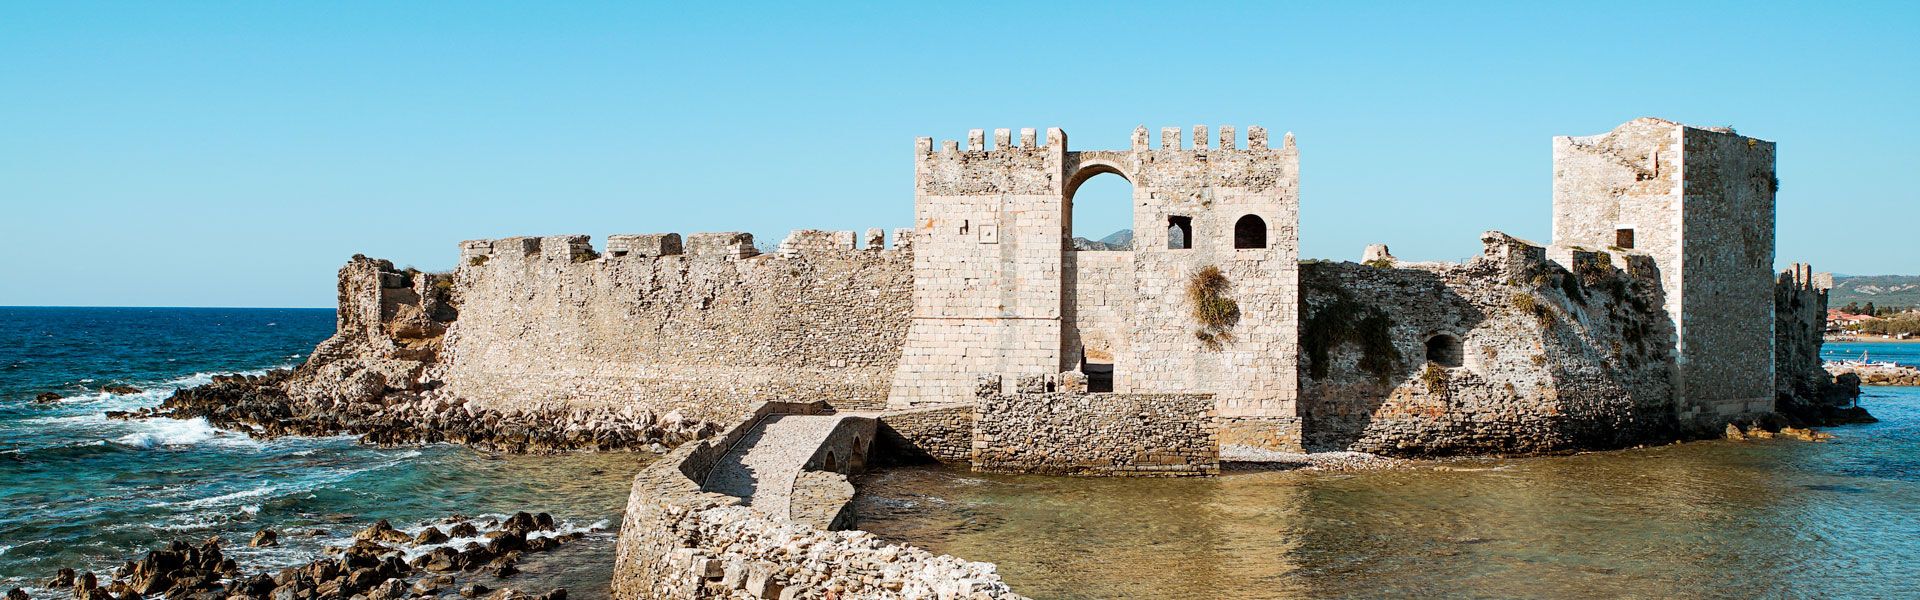 As soon as you set foot on the stone bridge of Methoni Castle, you'll be impressed